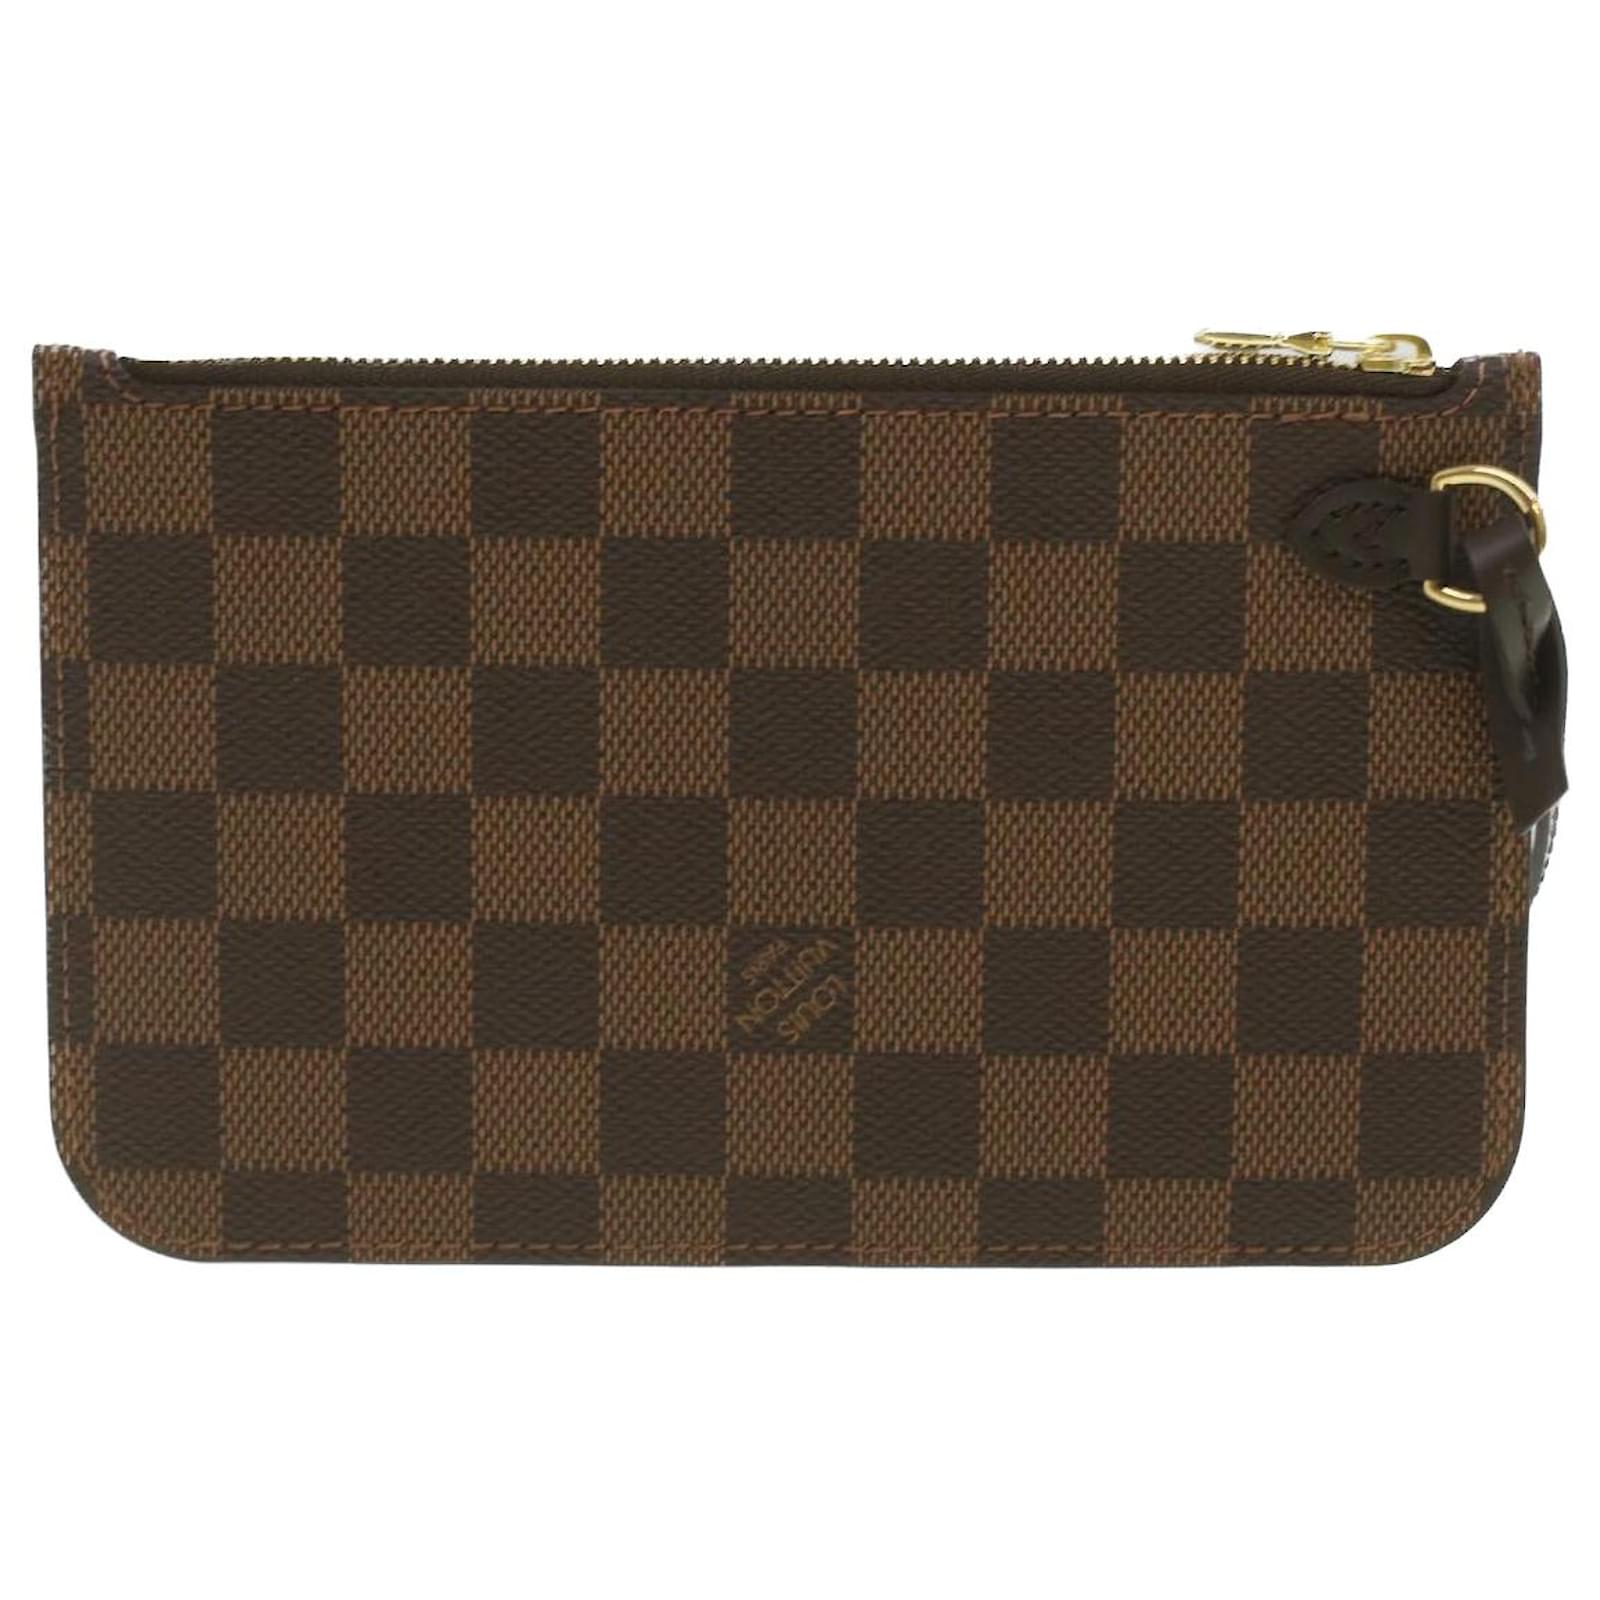 LV Neverfull PM Size in Damier Ebene Canvas, Luxury, Bags